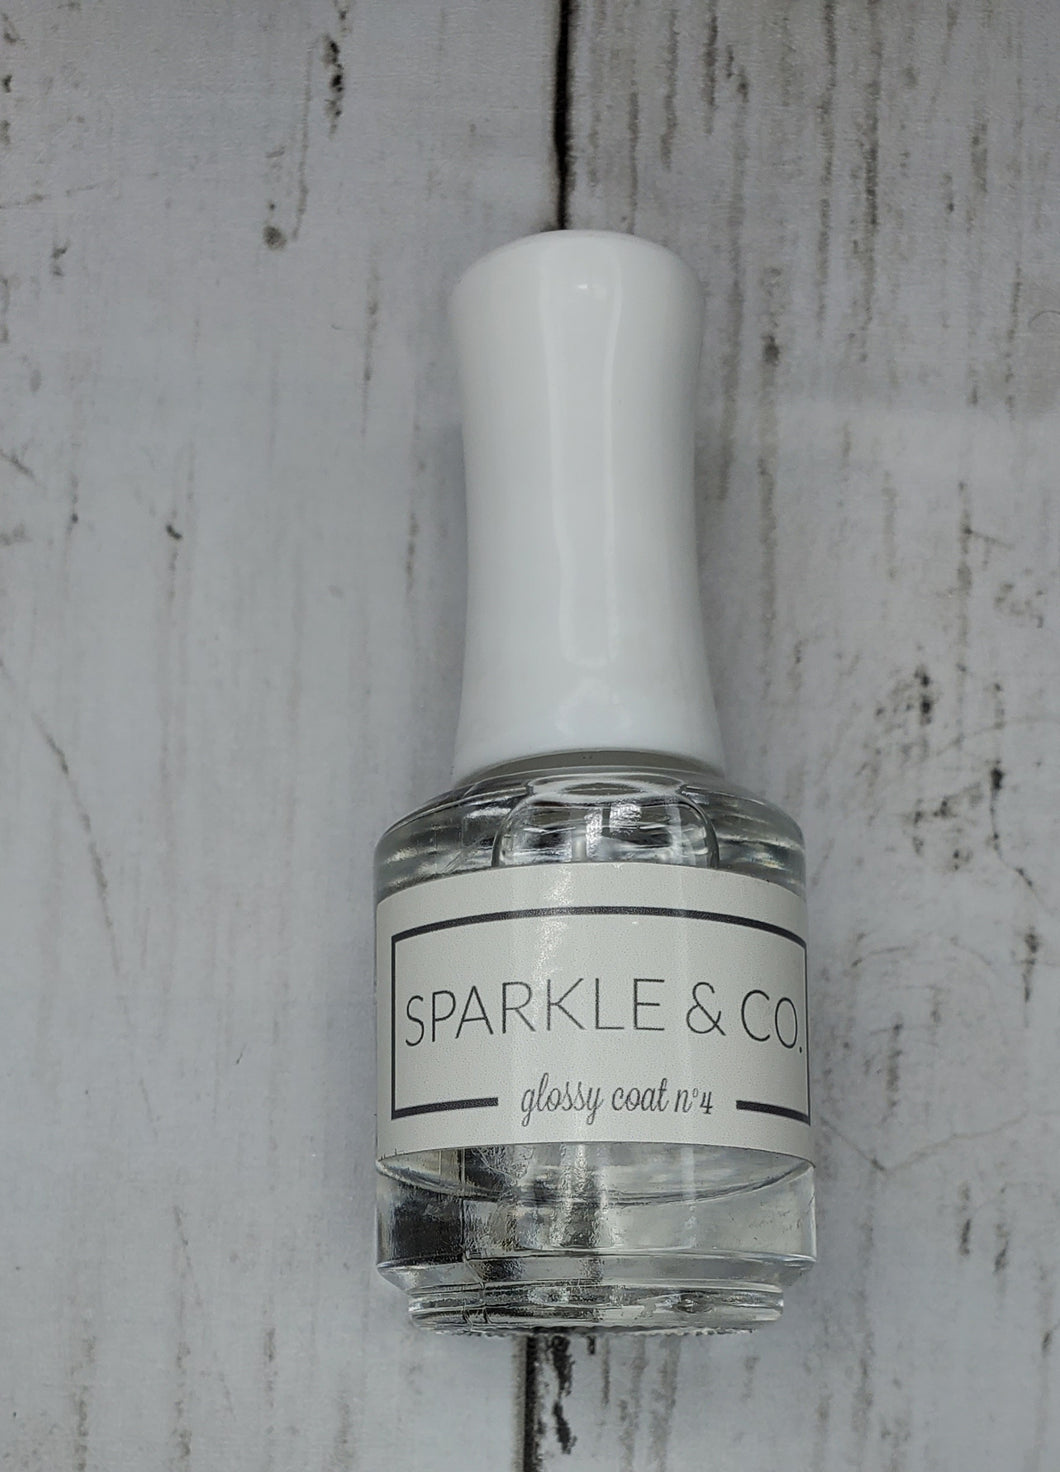 Sparkle & Co. Glossy Top Coat 2.0